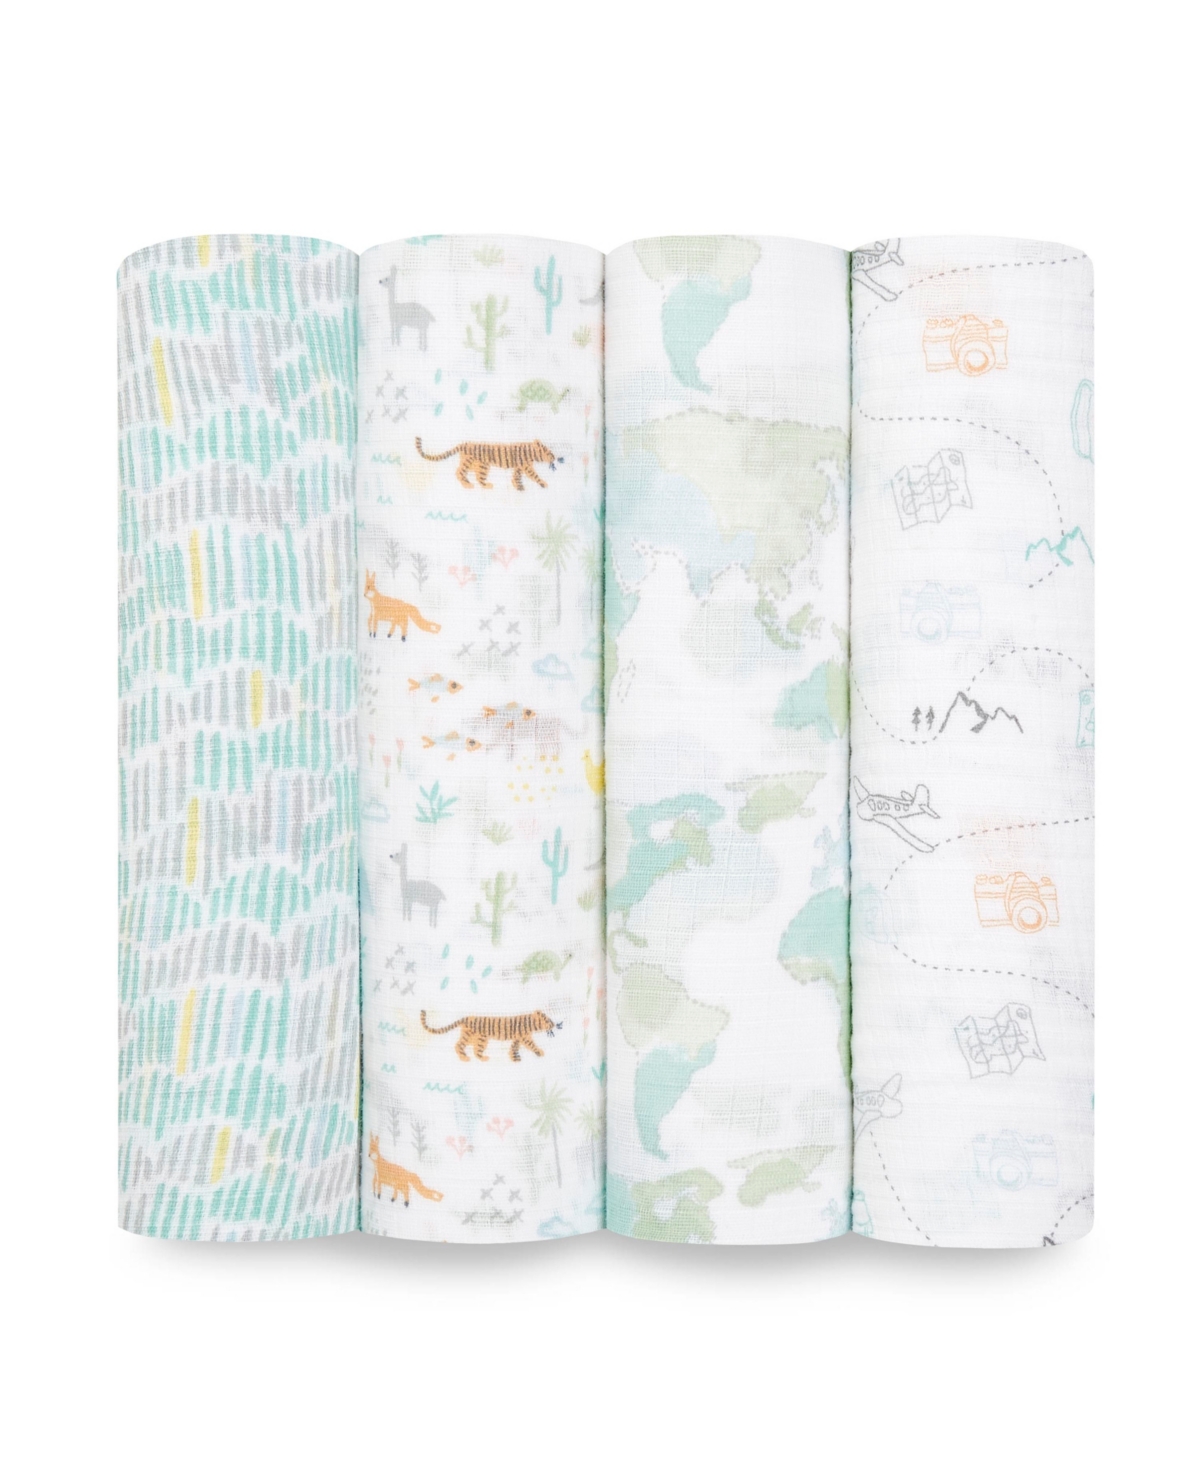 Aden By Aden + Anais Baby Boys Or Baby Girls Swaddle Blankets, Pack Of 4 In Multi